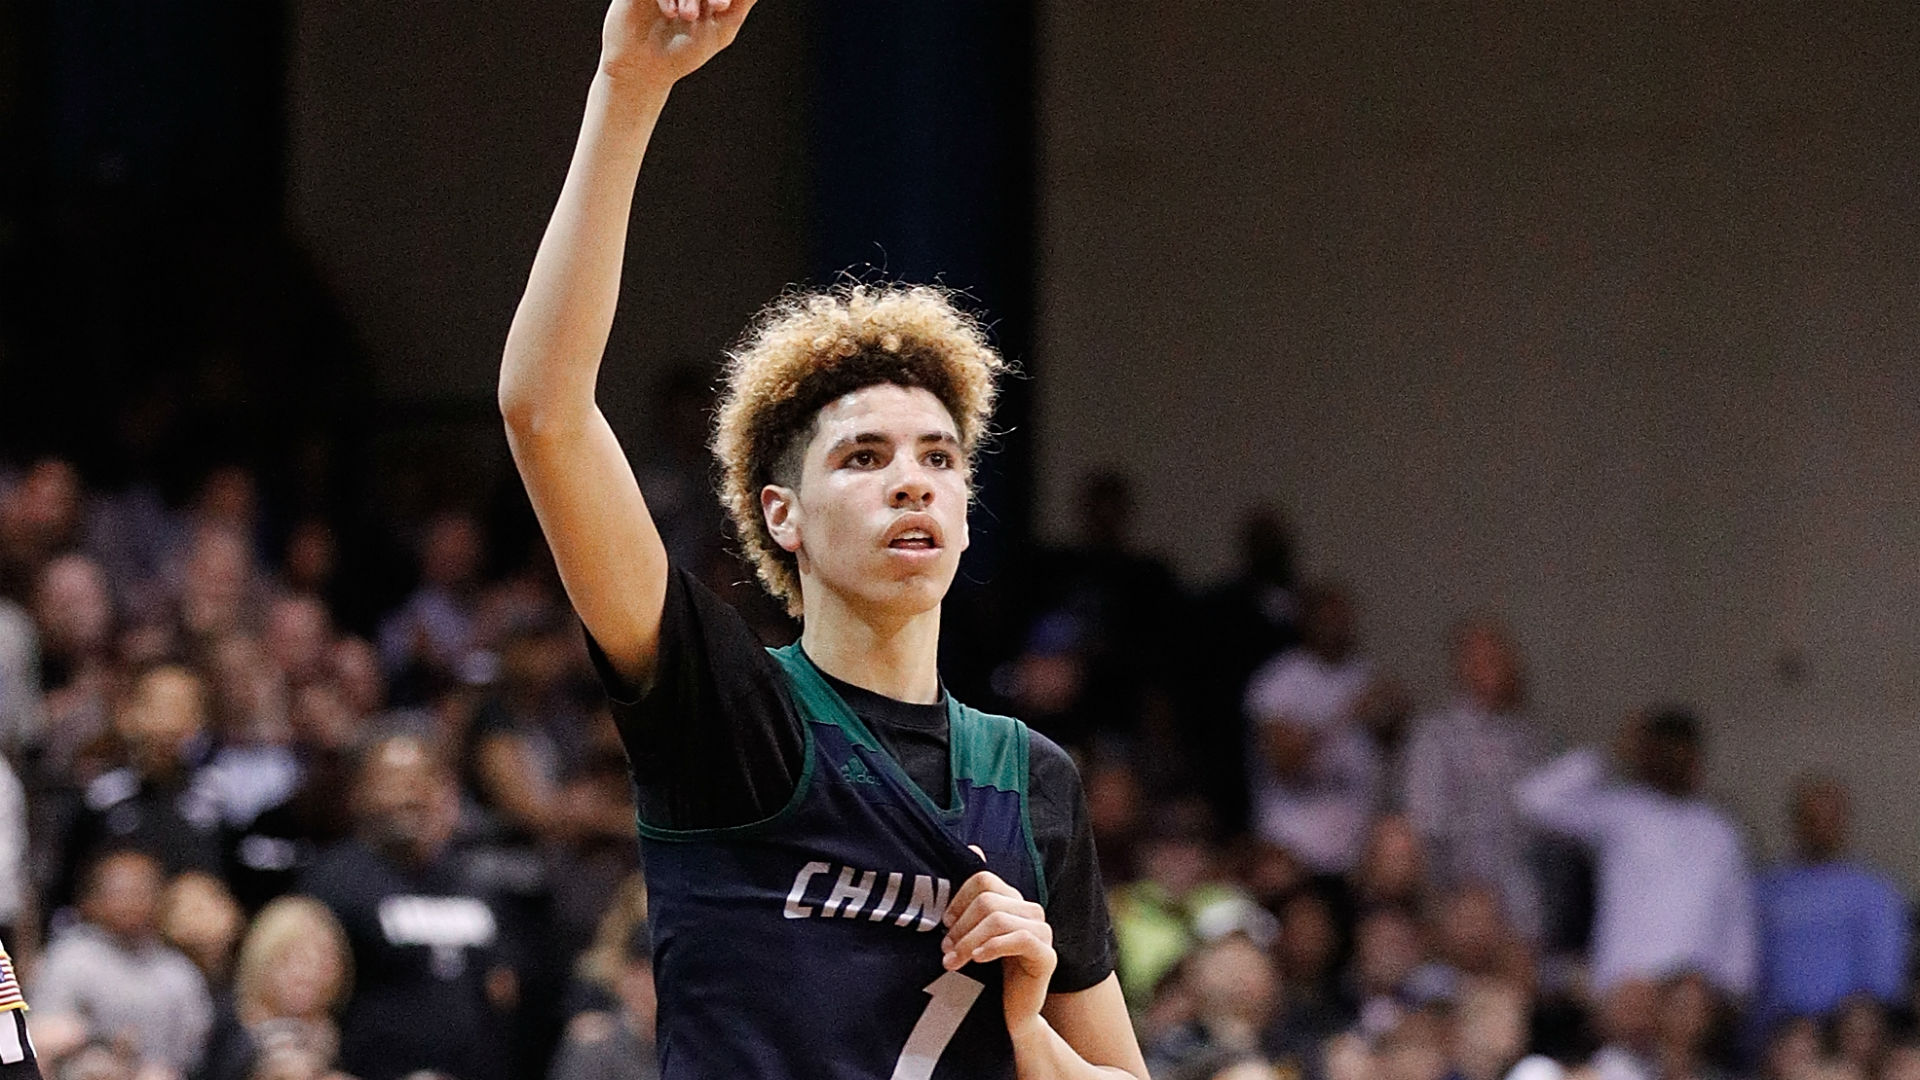 LaMelo Ball, brother of NBA star Lonzo Ball, has signed a contract with Illawarra Hawks of the NBL.